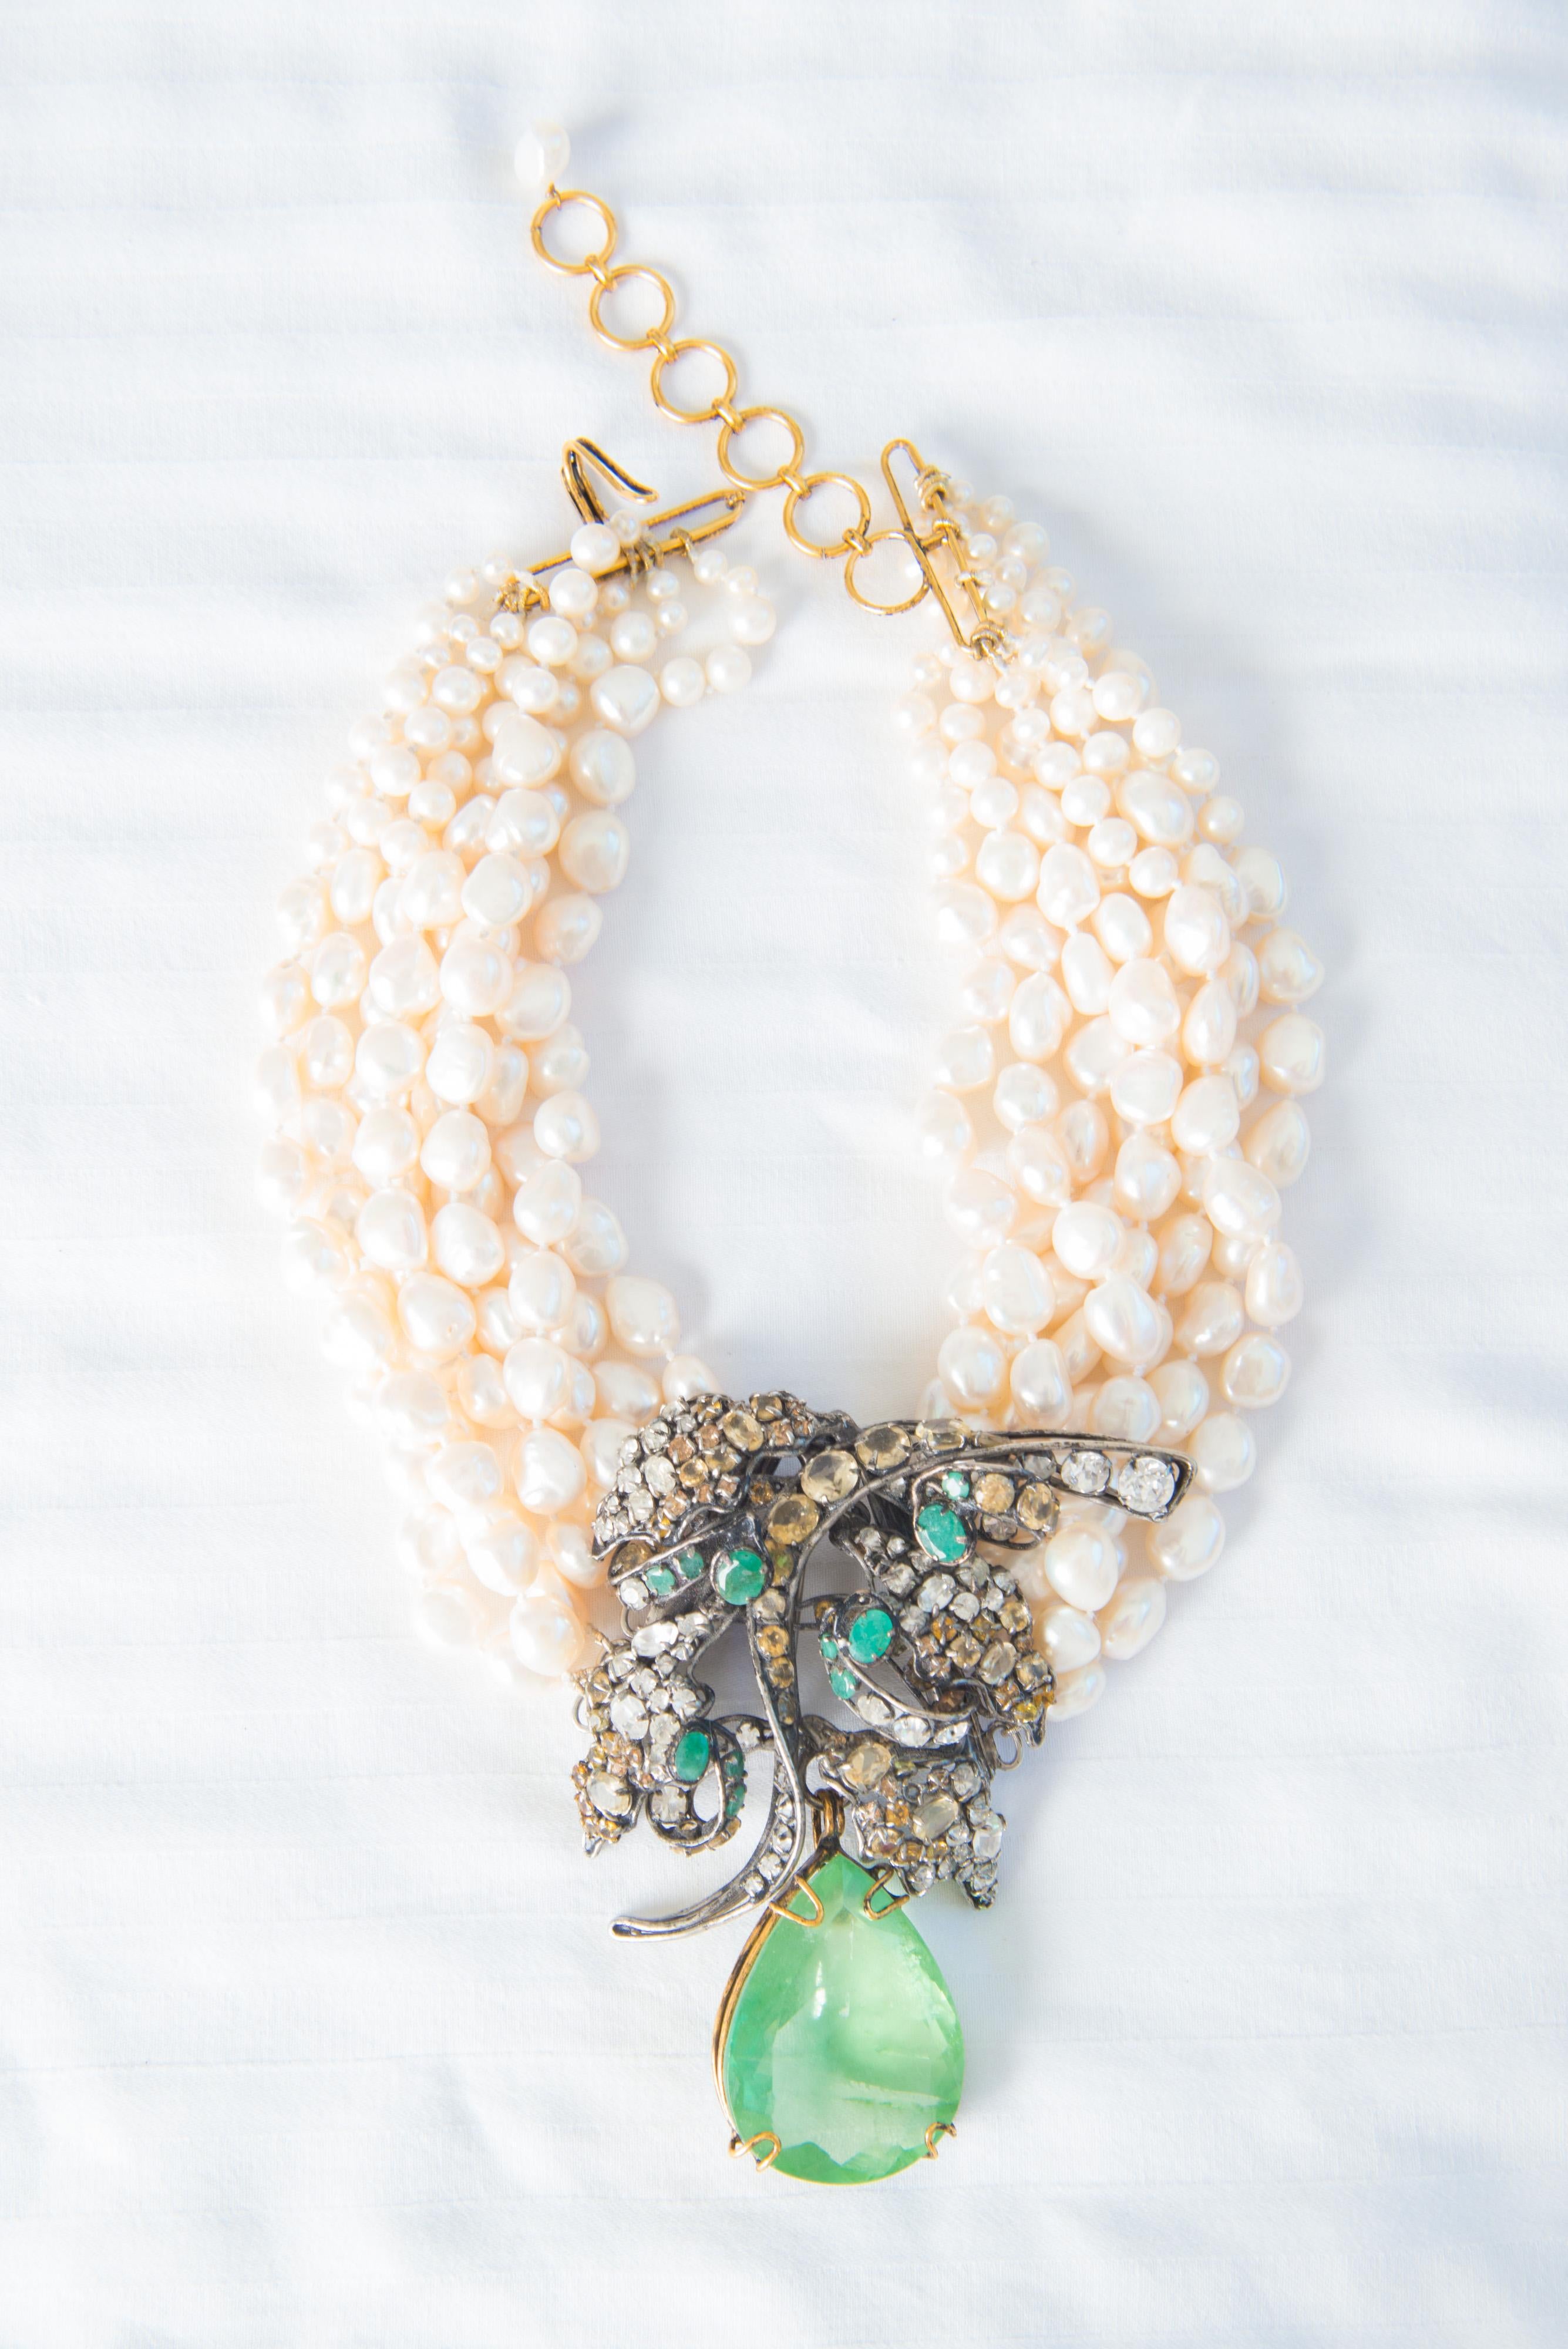 Beautiful Iradj Moini seven strand pearl necklace with removable pale emerald colored pear shape stone brooch decorated with clear and colored small stones.